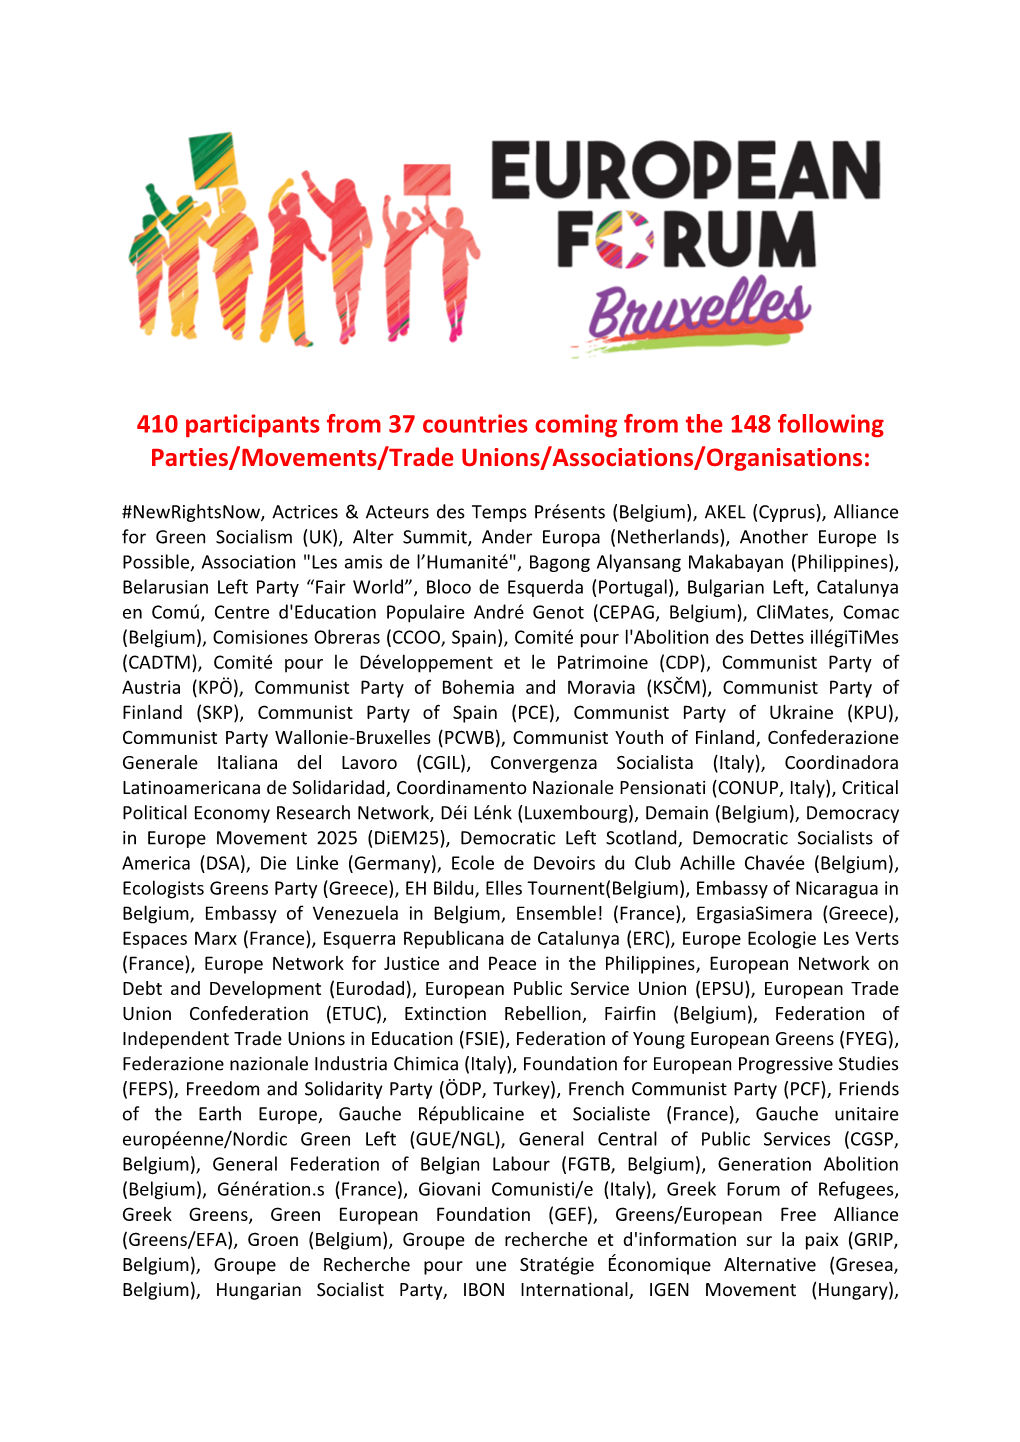 410 Participants from 37 Countries Coming from the 148 Following Parties/Movements/Trade Unions/Associations/Organisations